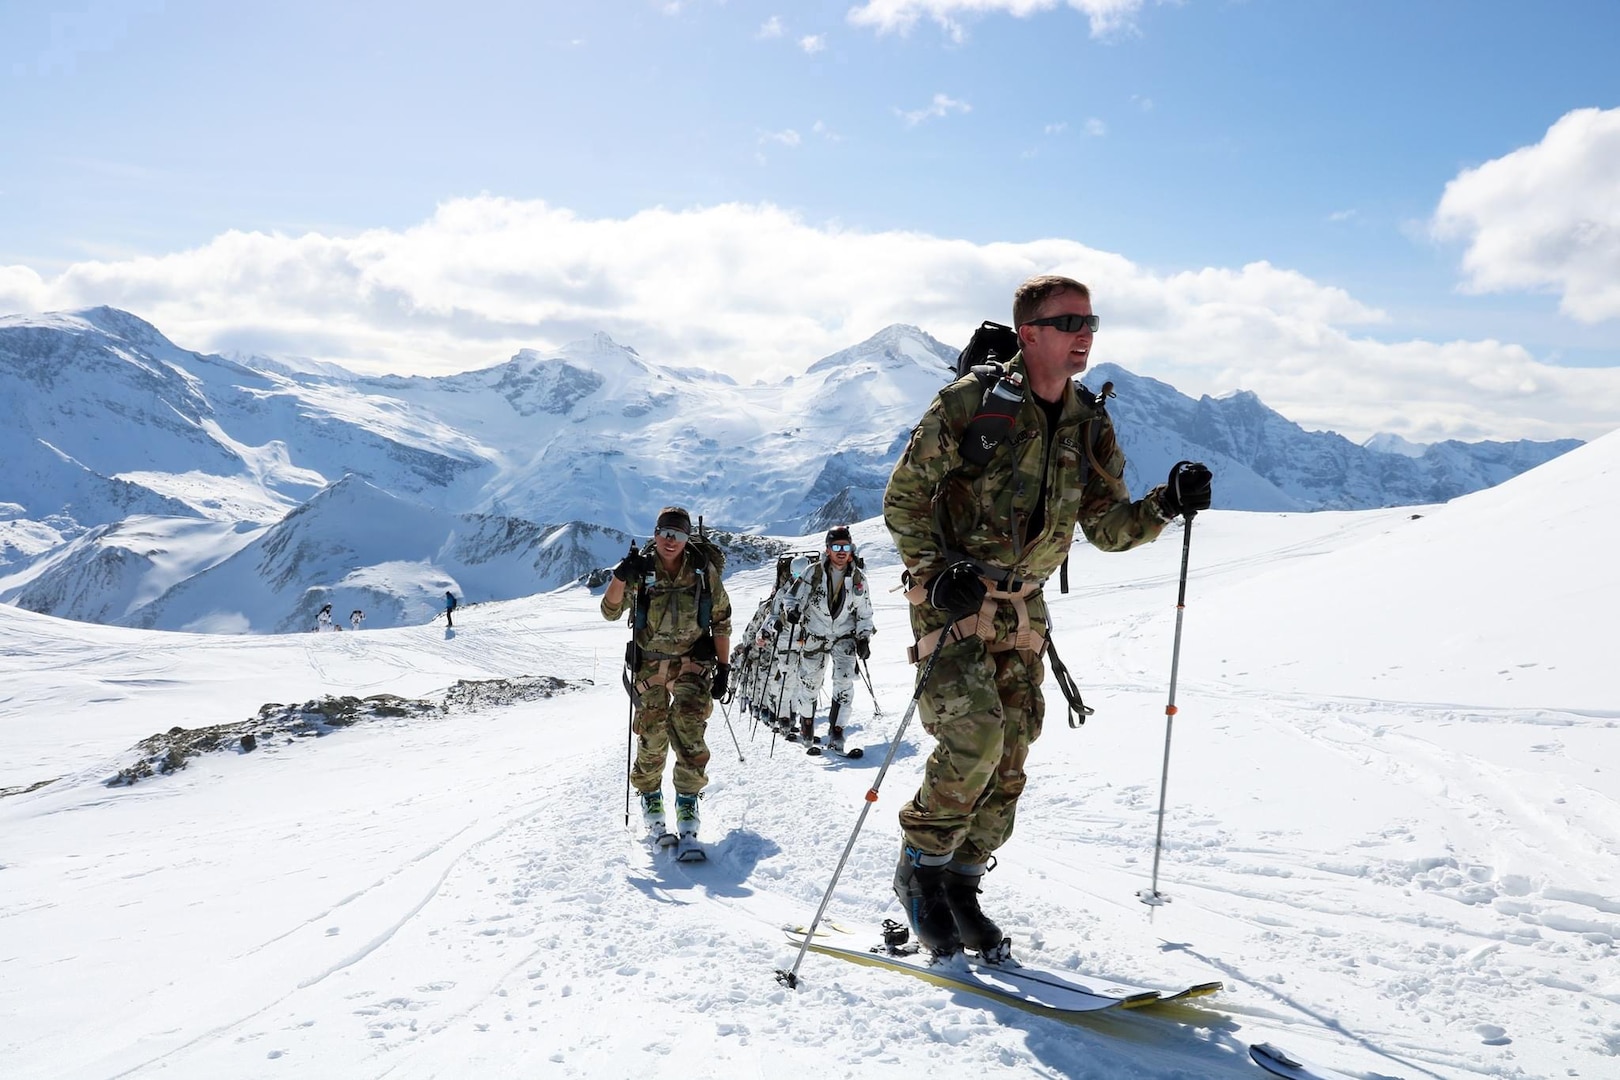 U.S. Army Maj. Charlie Flood, 86th Infantry Brigade Combat Team (Mountain), Vermont Army National Guard, leads the competition team as they pass a German squad during the 2023 Edelweiss Raid in Austria March 2, 2023.